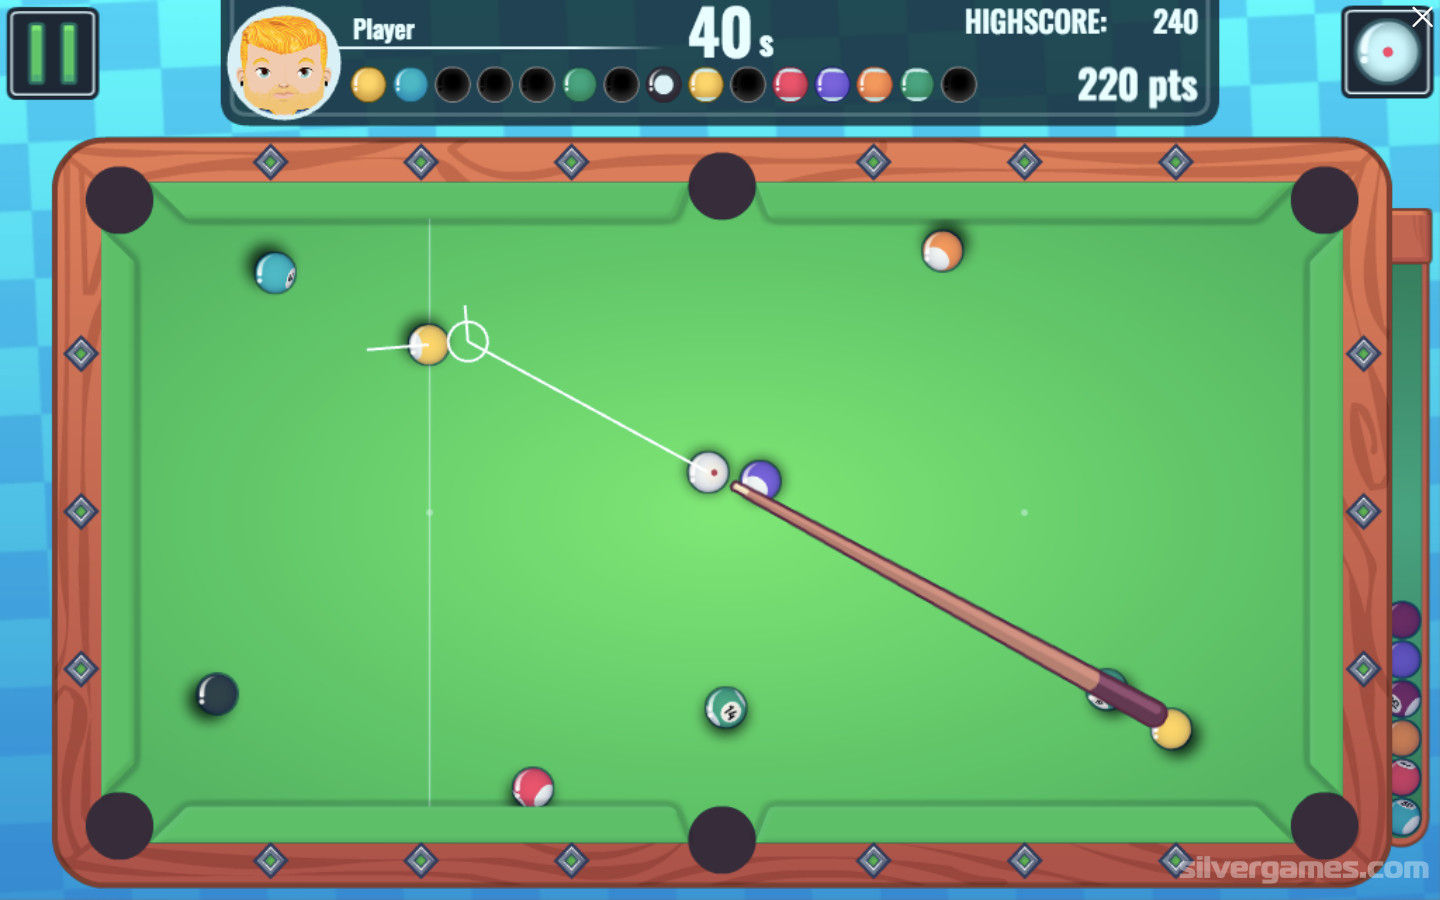 Snooker Games: Play Snooker Games on LittleGames for free